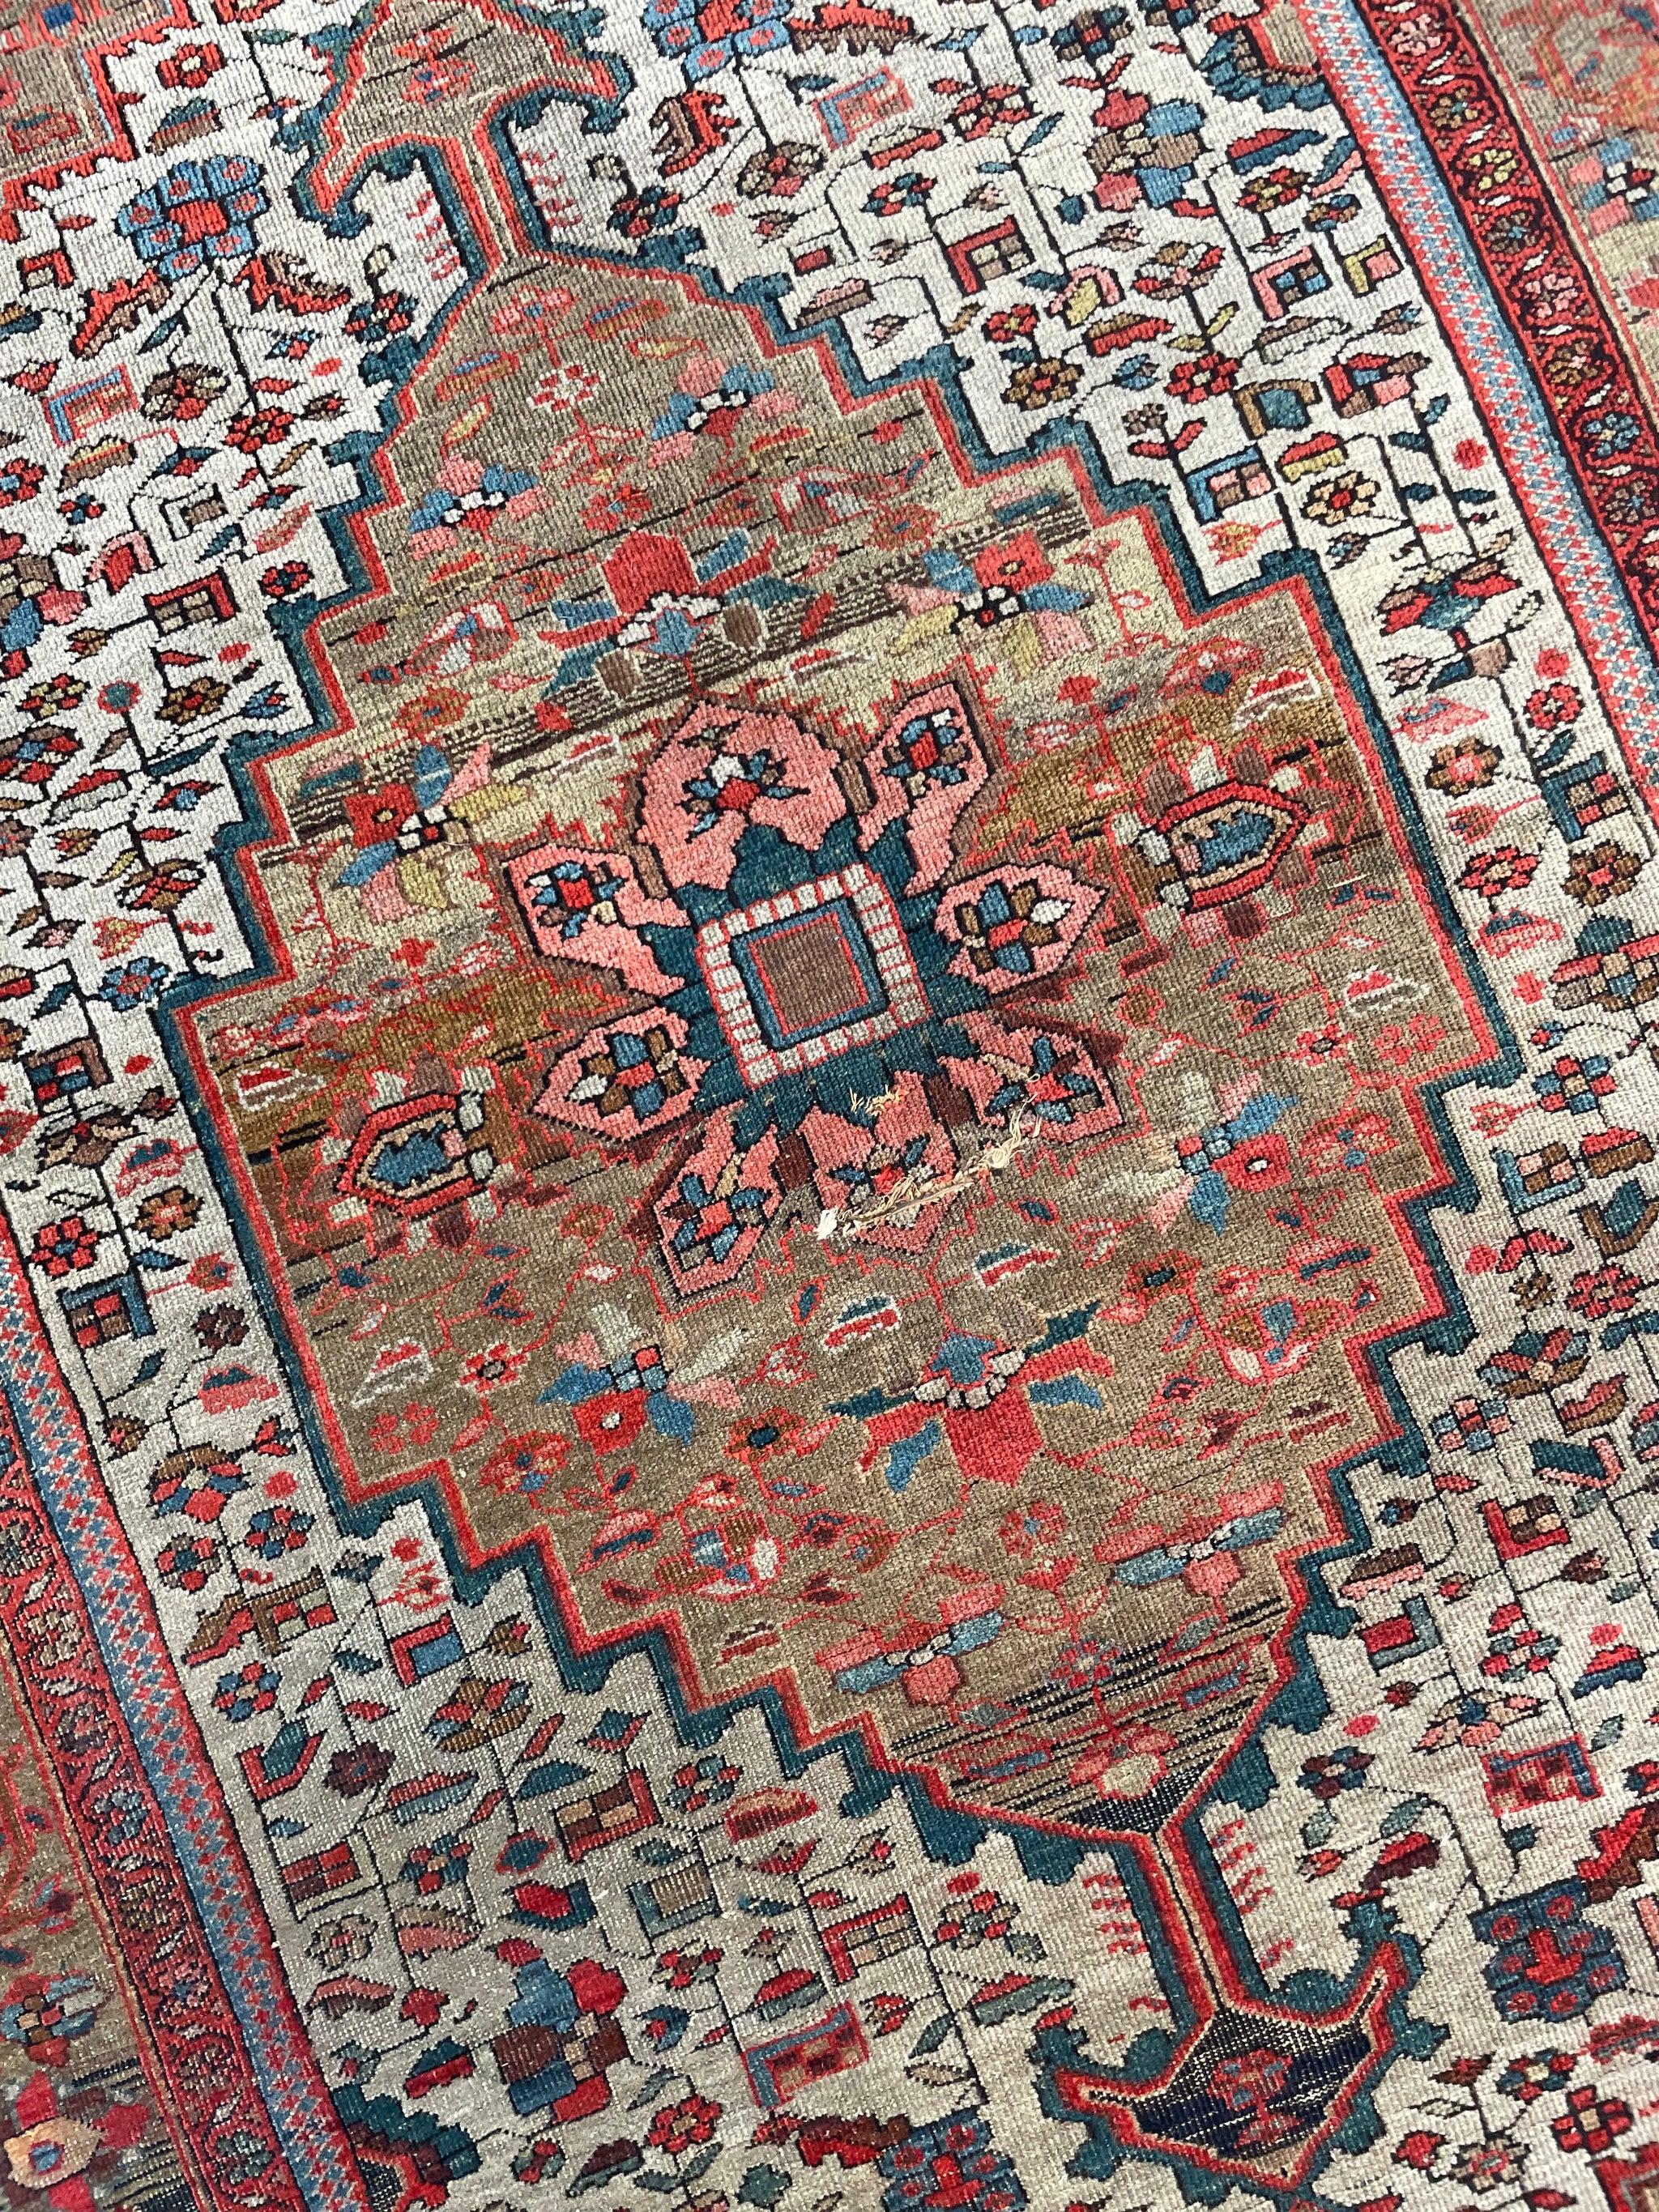 Sedona Antique Ferahan Sarouk Rug  Soft Earthy Hues With Warm And Cool Hues

Size: 4.3 x 6.7
Age: Antique, C. 1920-30's
Pile: Low with incredible age-related patina. Few small areas of that we've secured by hand, see pics

This rug is one-of-a-kind,